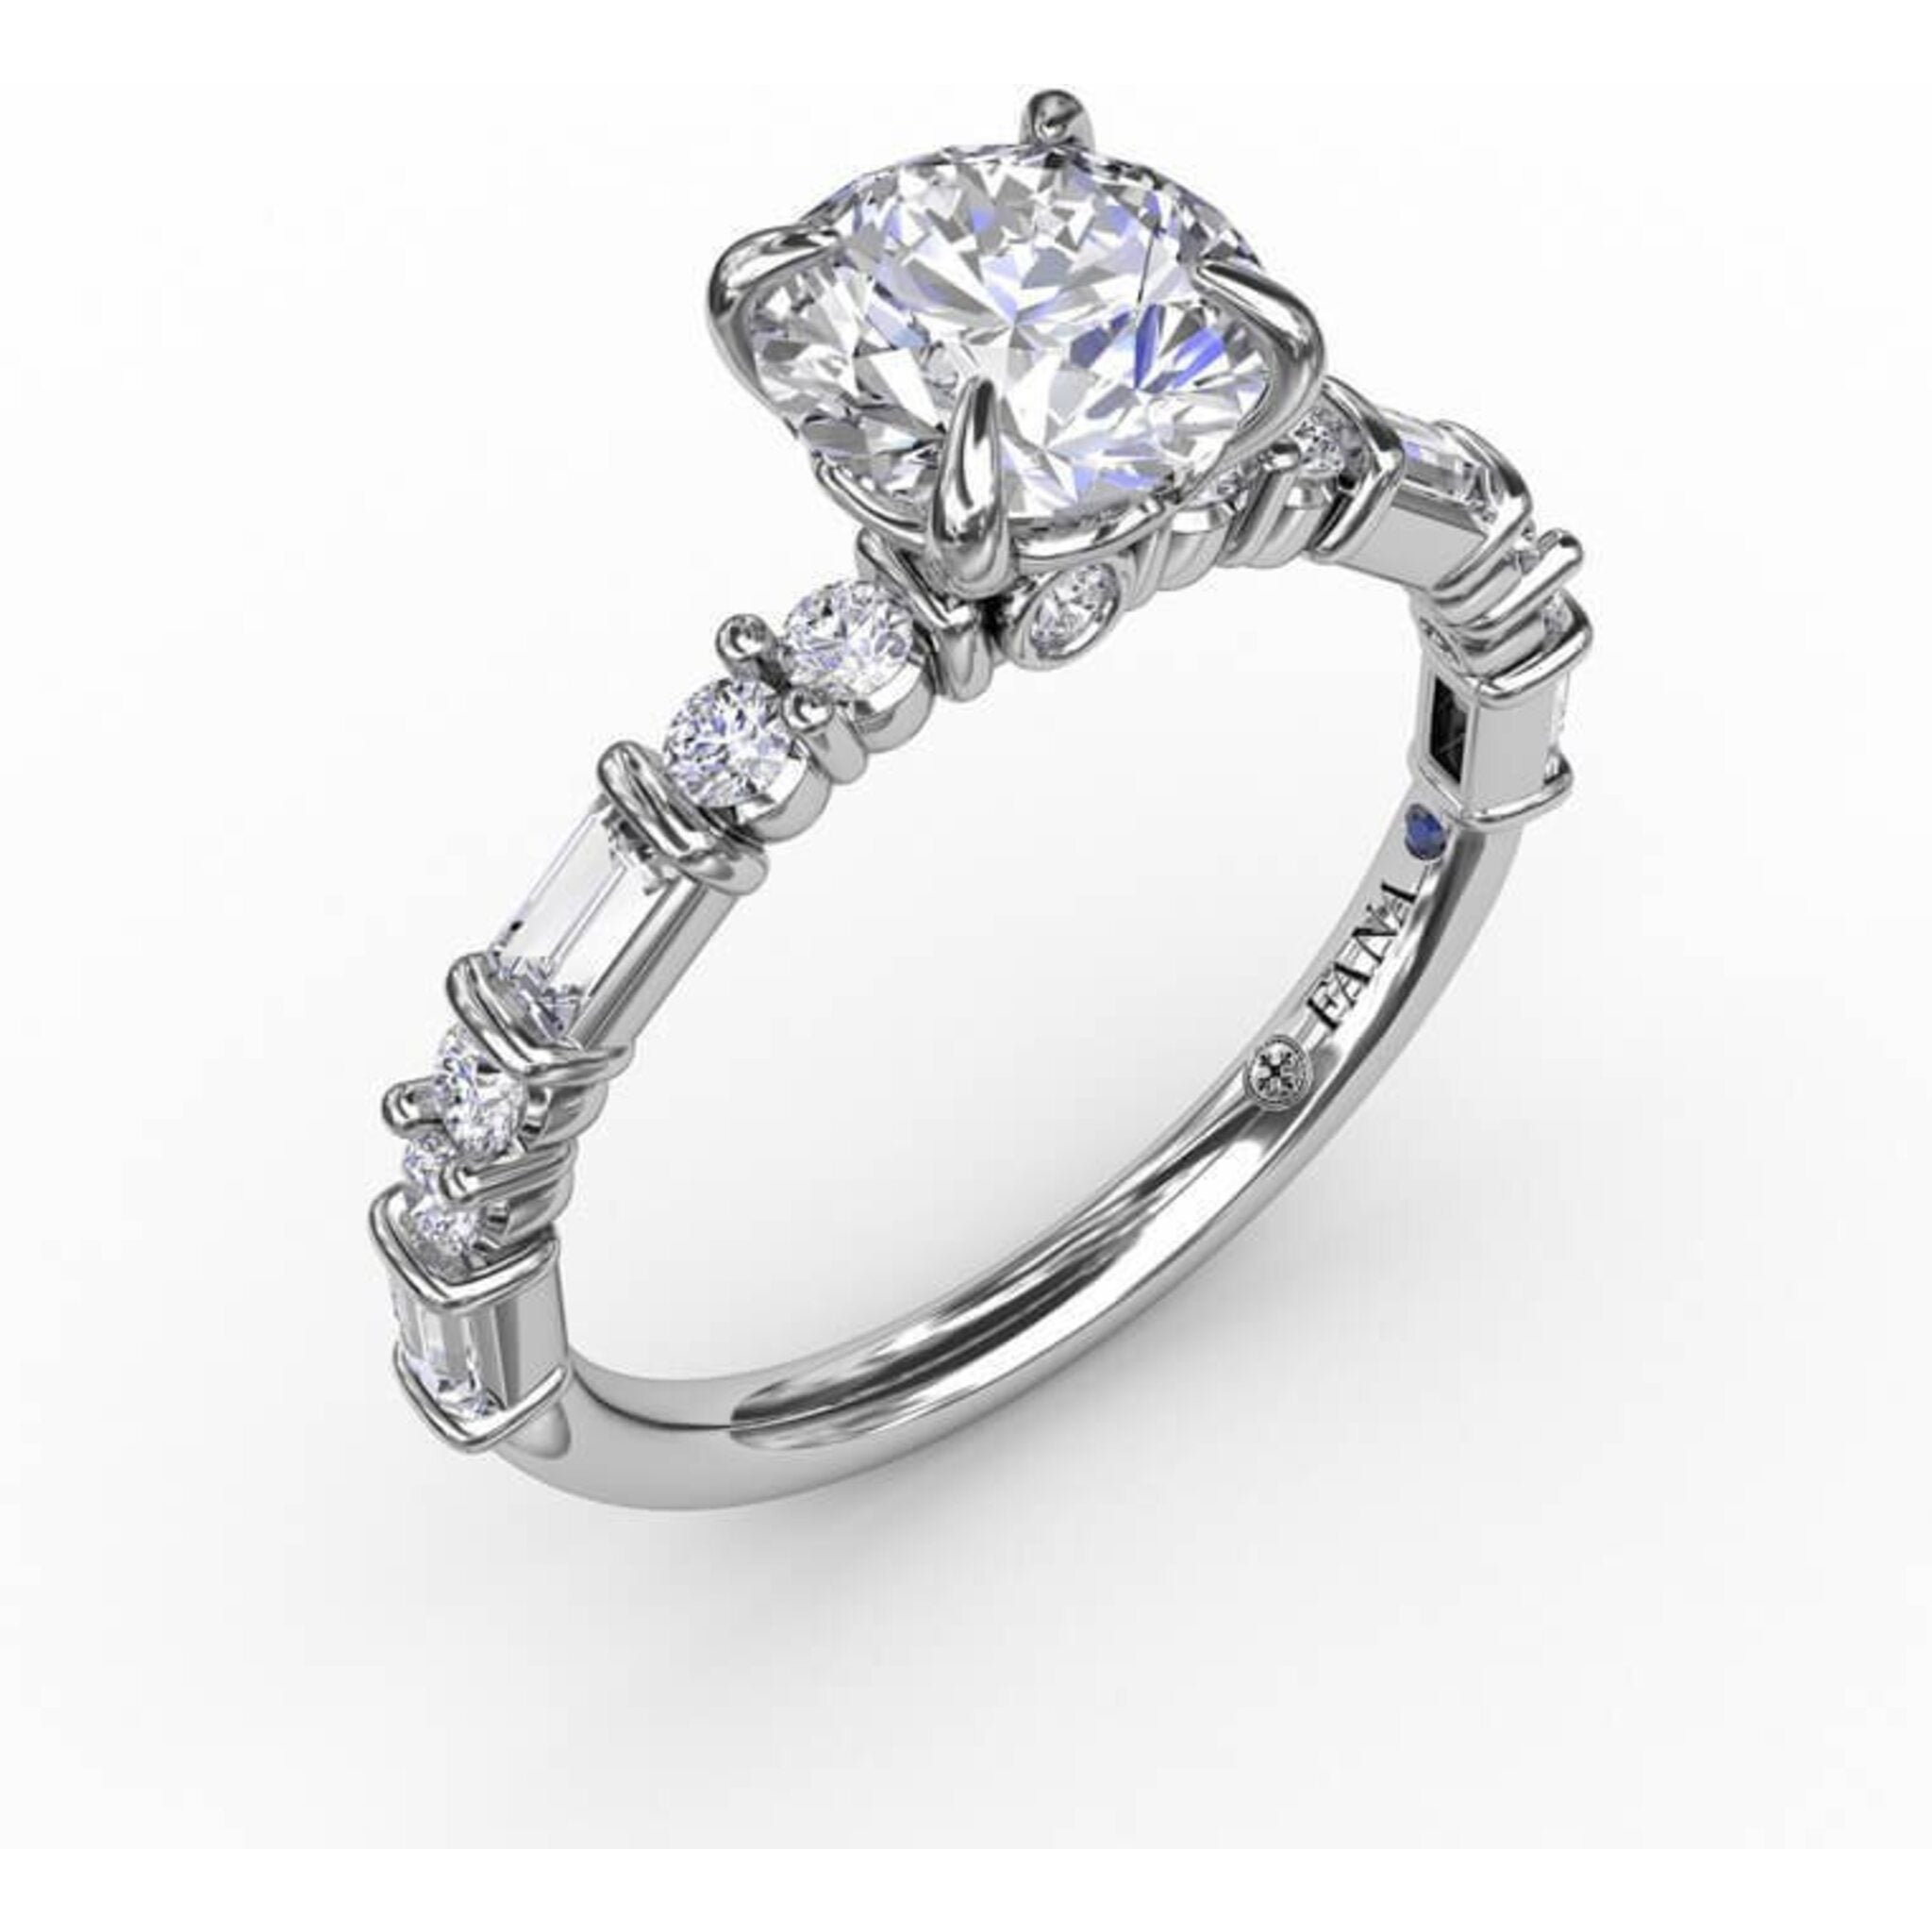 Fana Contemporary Diamond Solitaire Engagement Ring With Baguettes and Round Diamond Accents